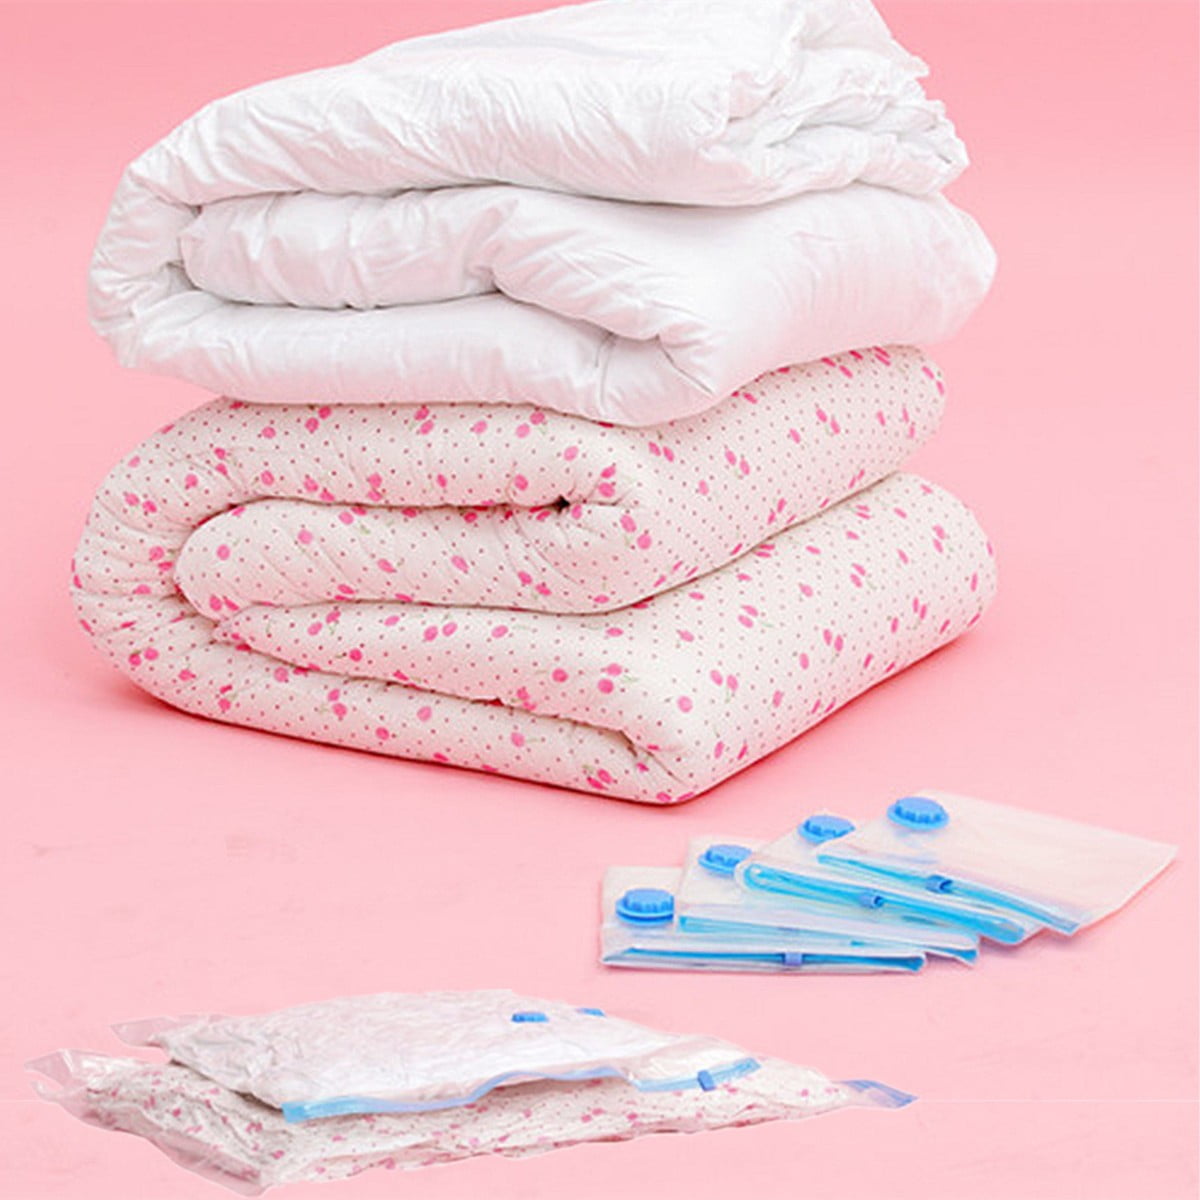 Do vacuum seal storage bags ruin clothes, by Jenny Pink